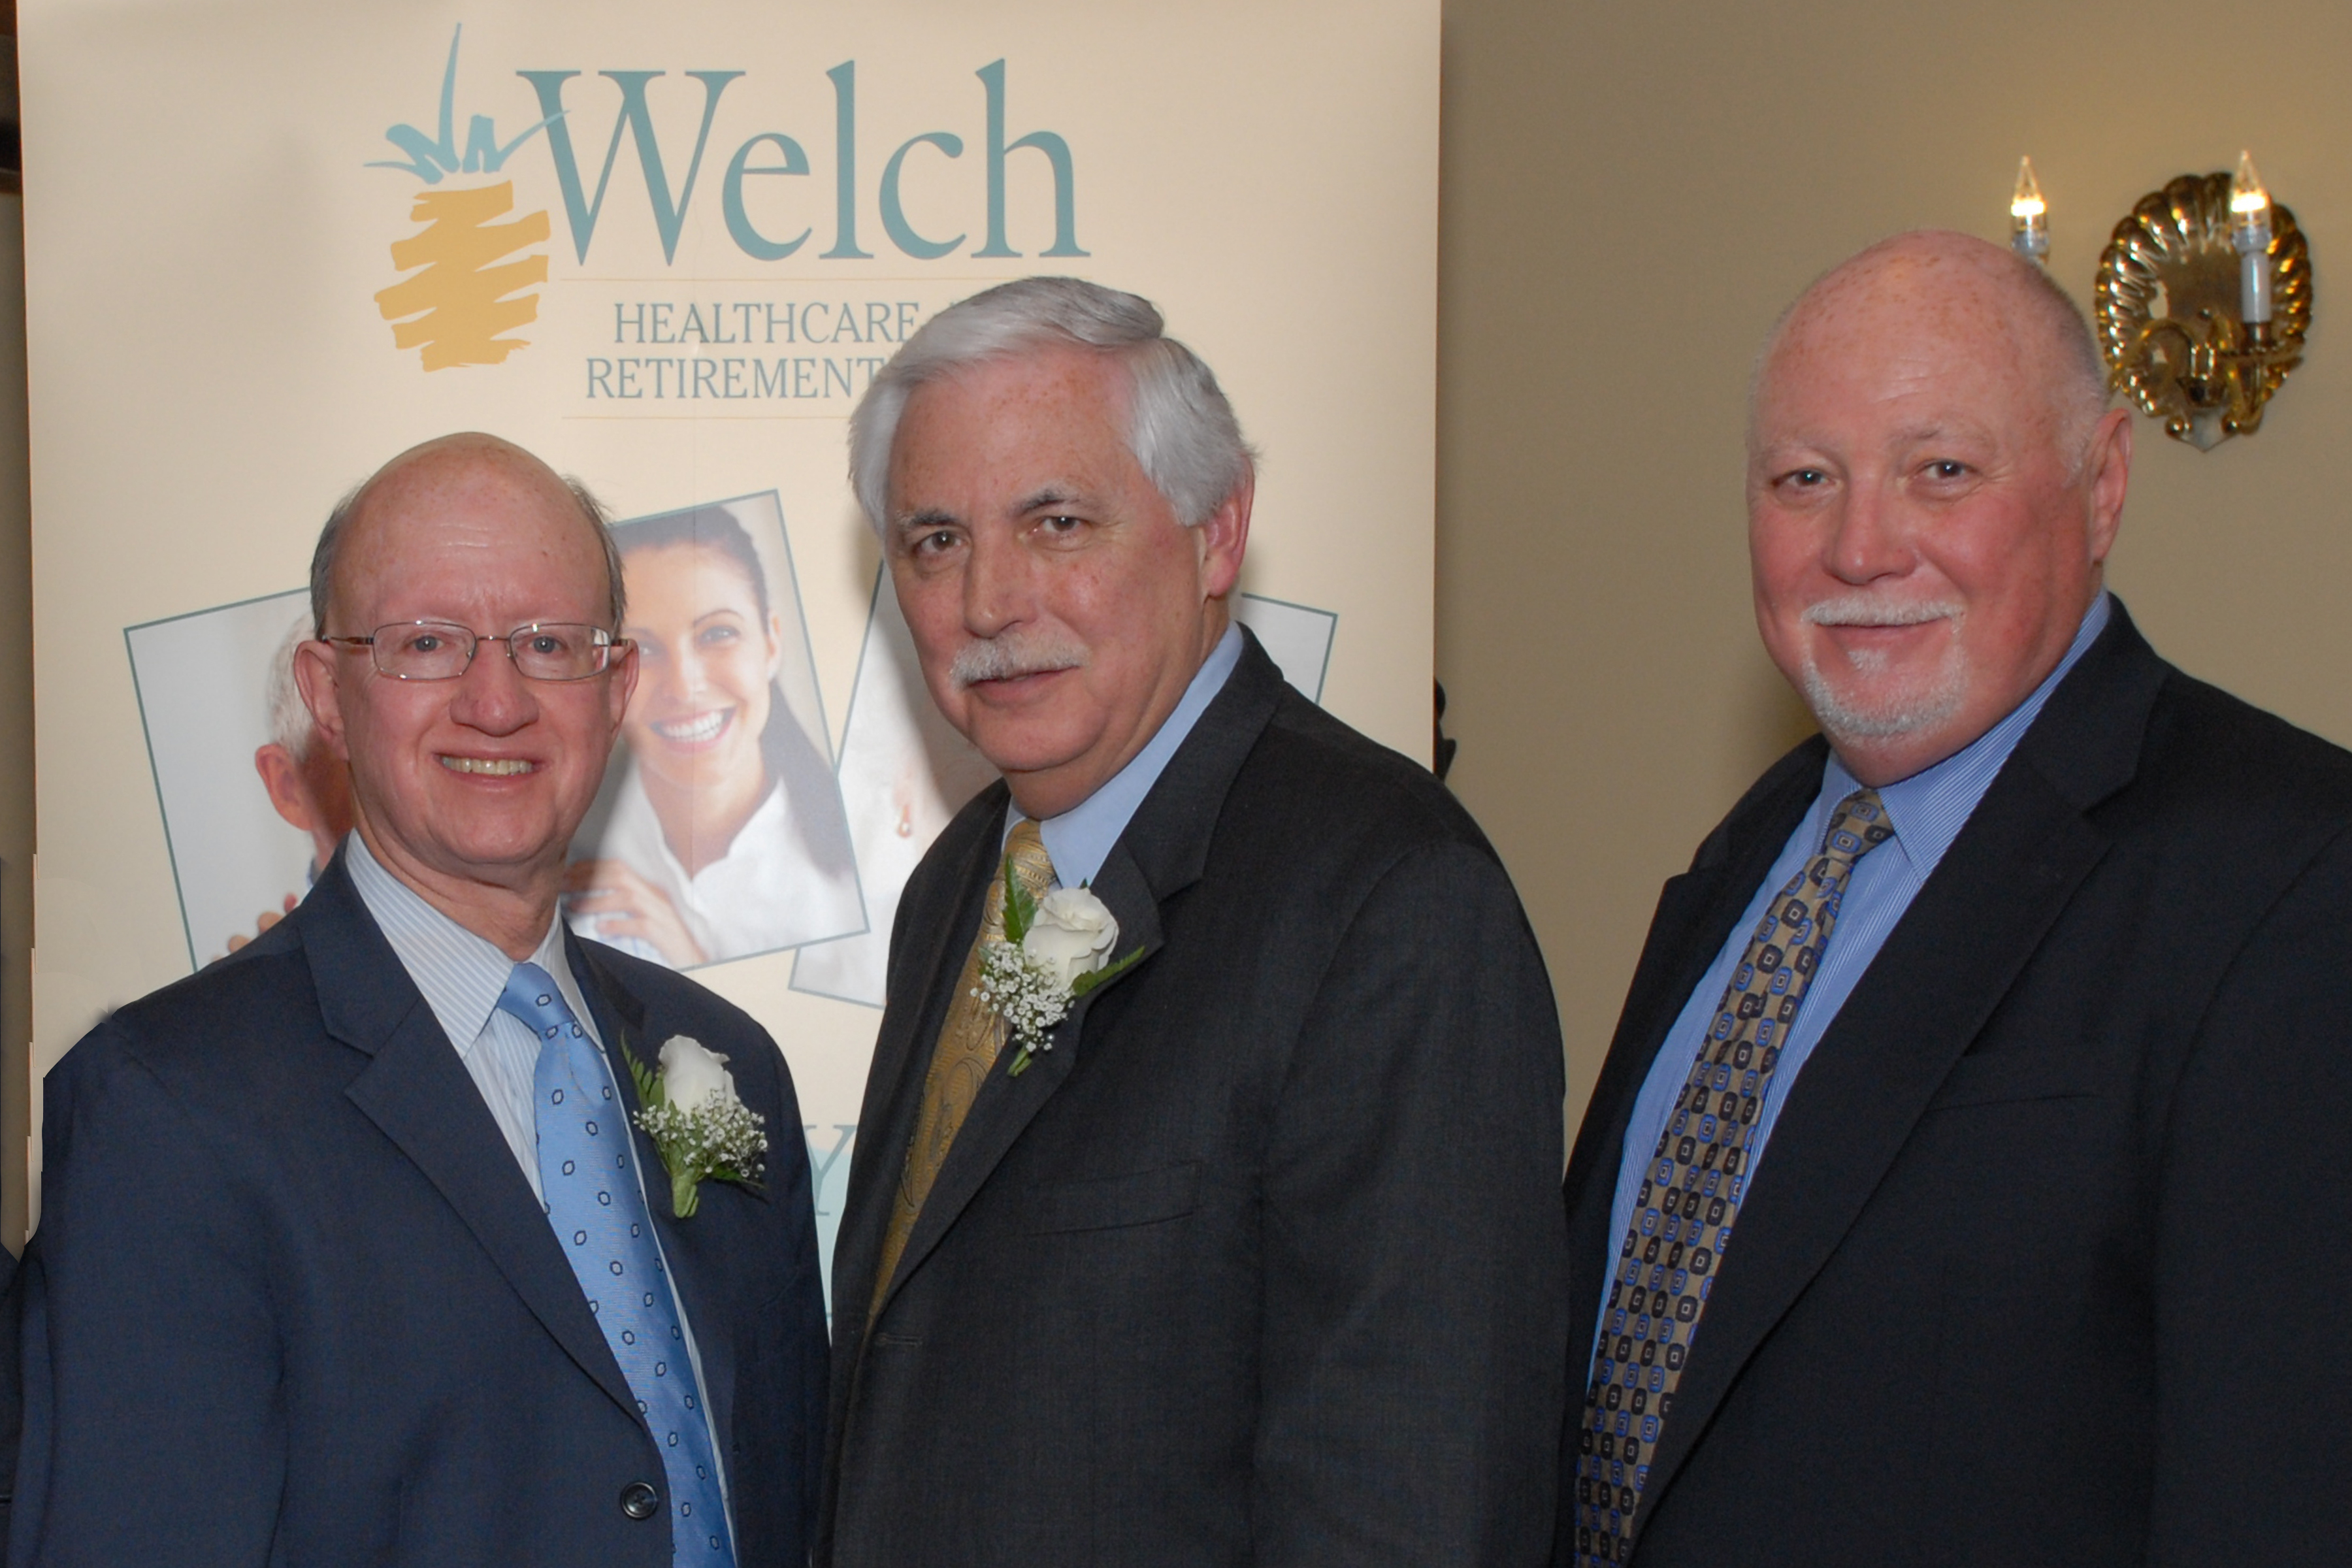 Welch Healthcare and Retirement Group principals (L to R): Paul T. Caslale Sr, Richard M. Welch Sr., and Michael Welch